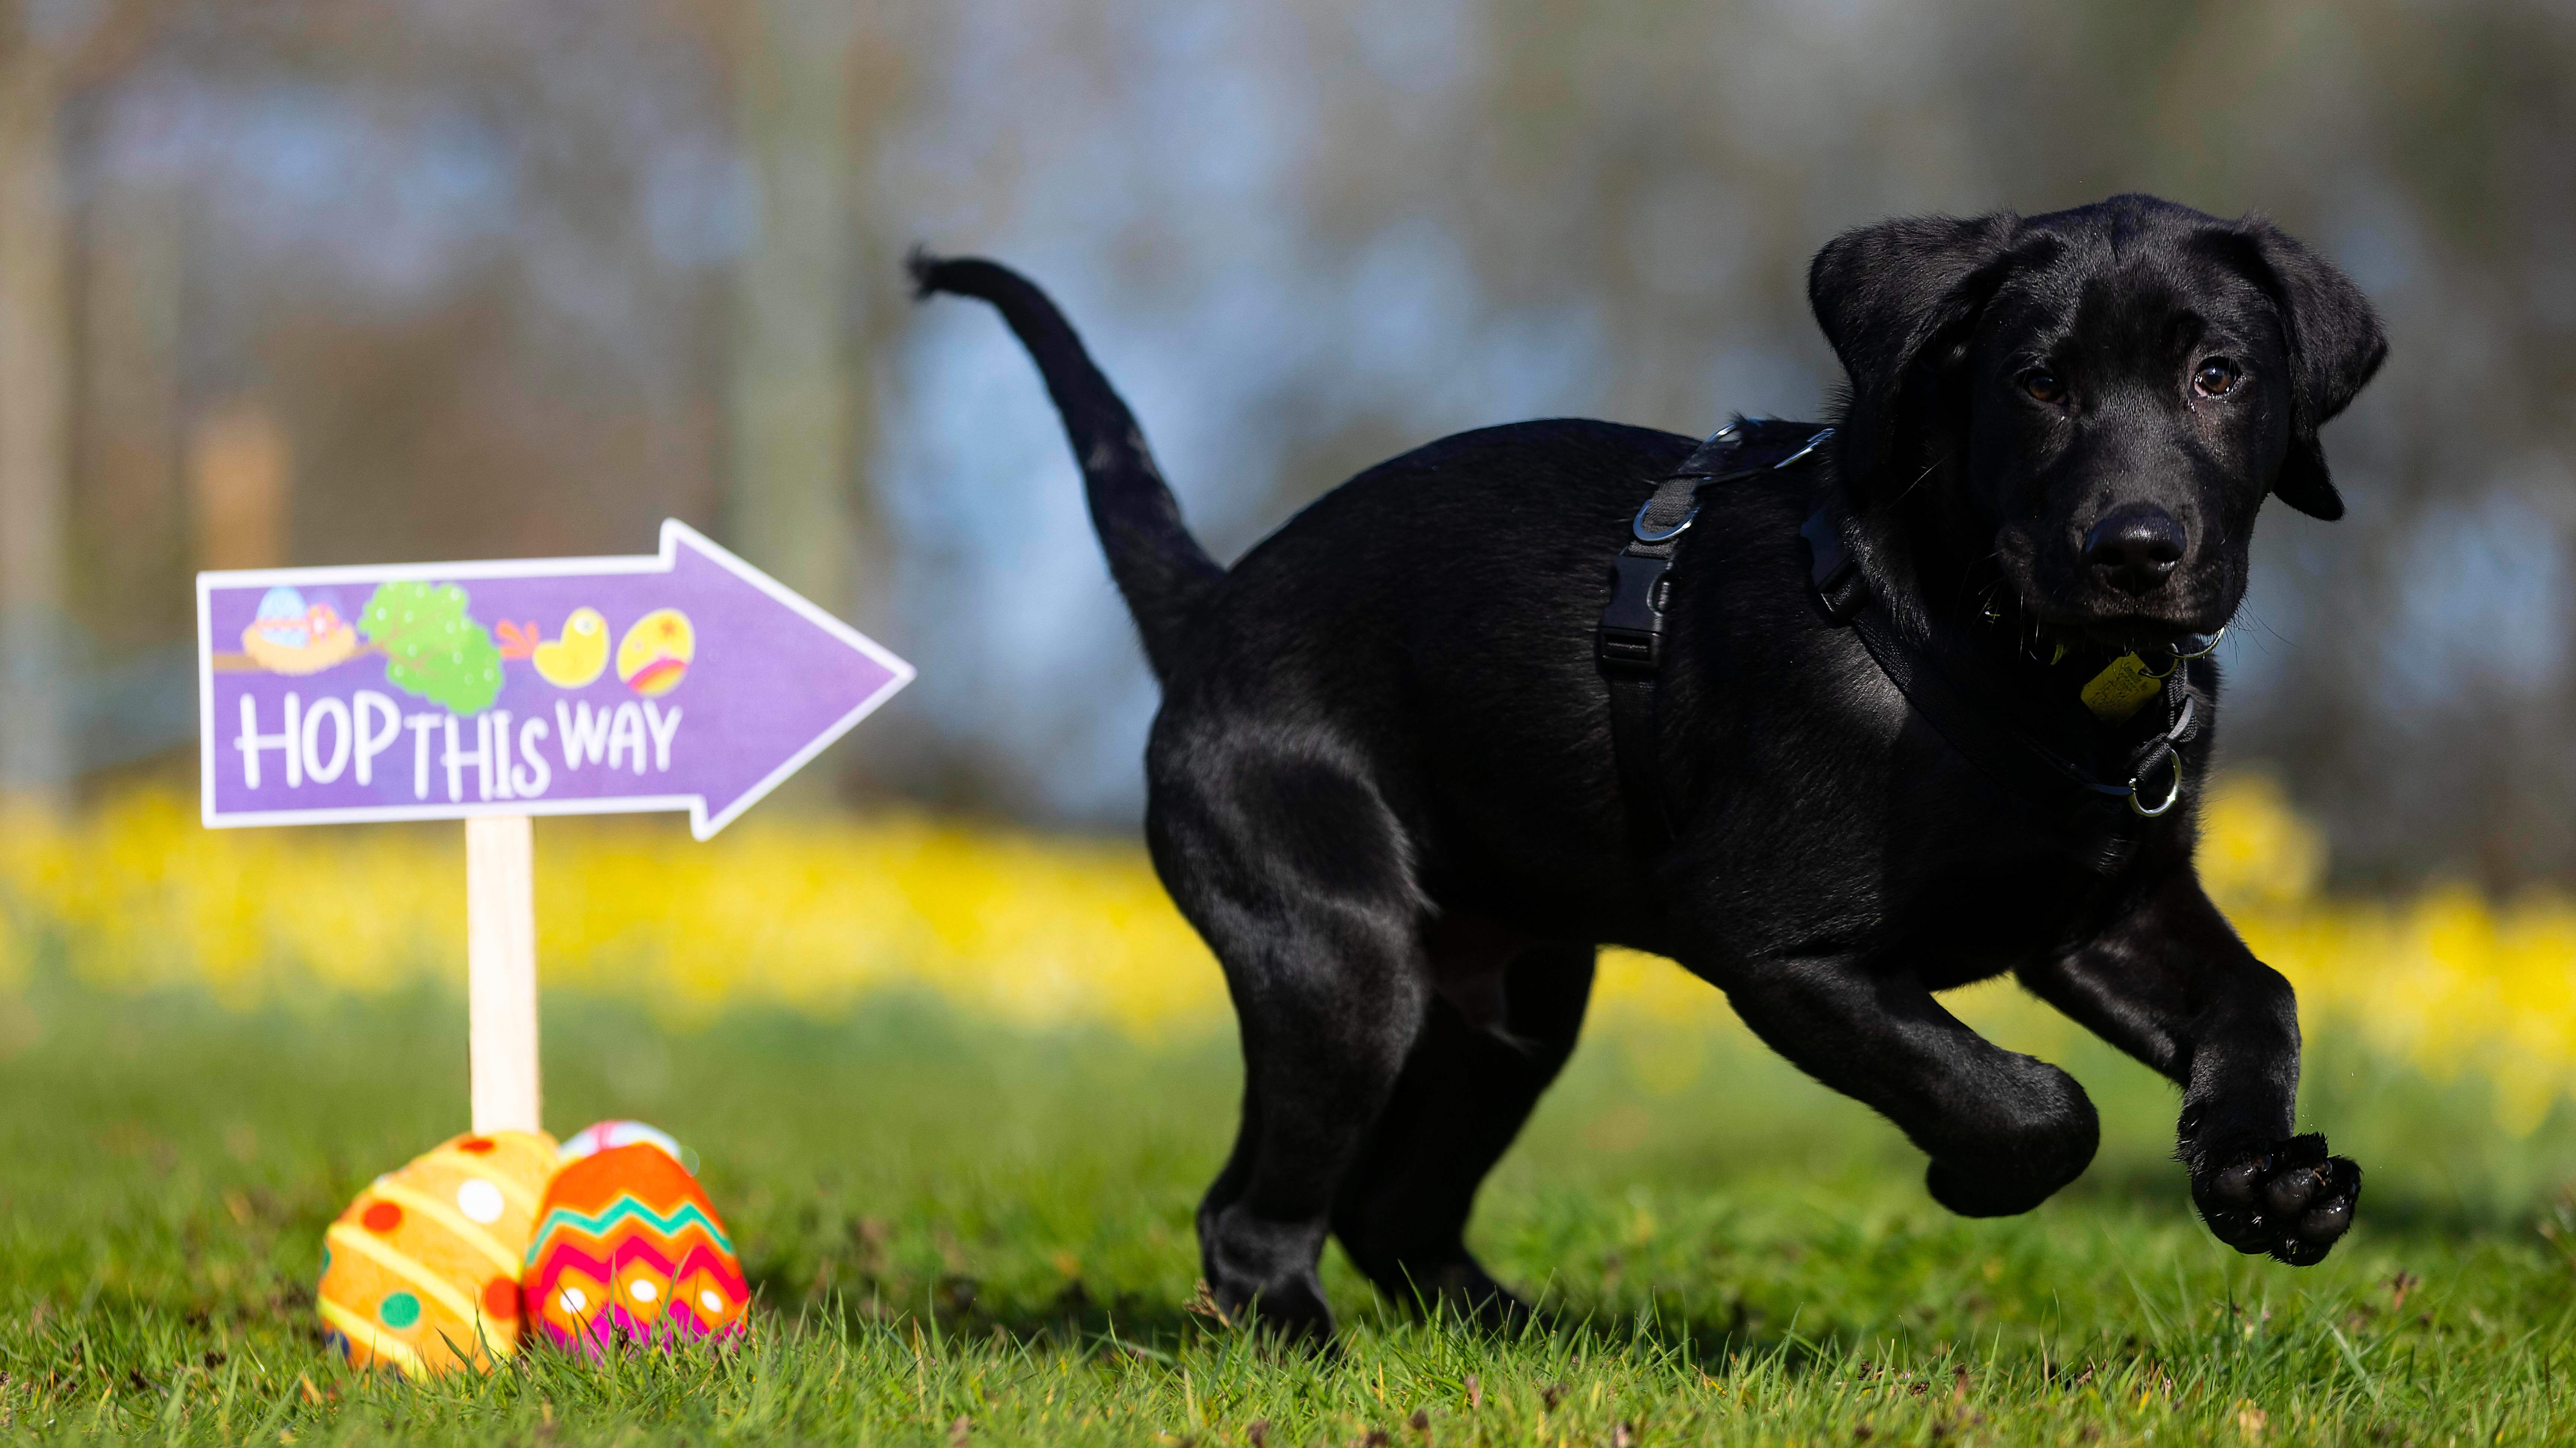 Black Labrador guide dog puppy Joshua takes part in Easter egg hunt, jumping and looking at the camera. He is next to a purple sign that says 'Hop this way' which has cuddly toy eggs around it